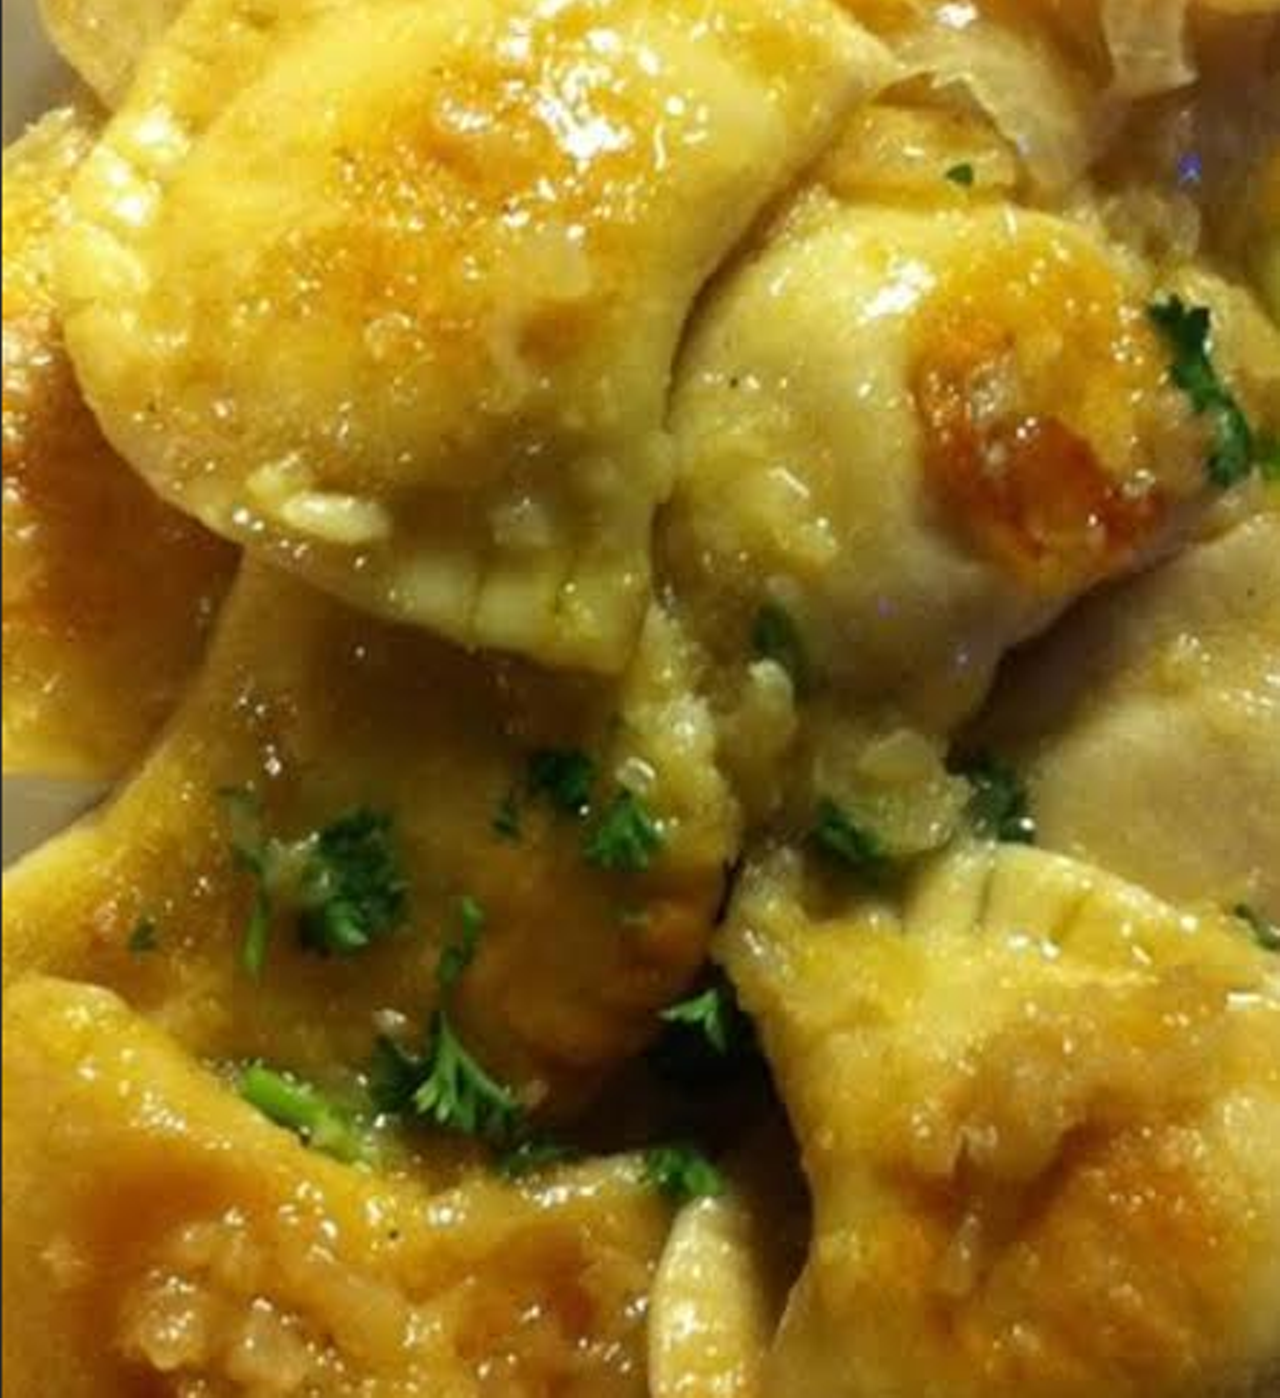 For over a decade, the Sokolowski family at University Inn in Tremont has been making pierogies in-house finished with what they coined "a butter jacuzzi." Stop in at Sokolowski's University Inn
1201 University Rd., Tremont, 216.771.9236.